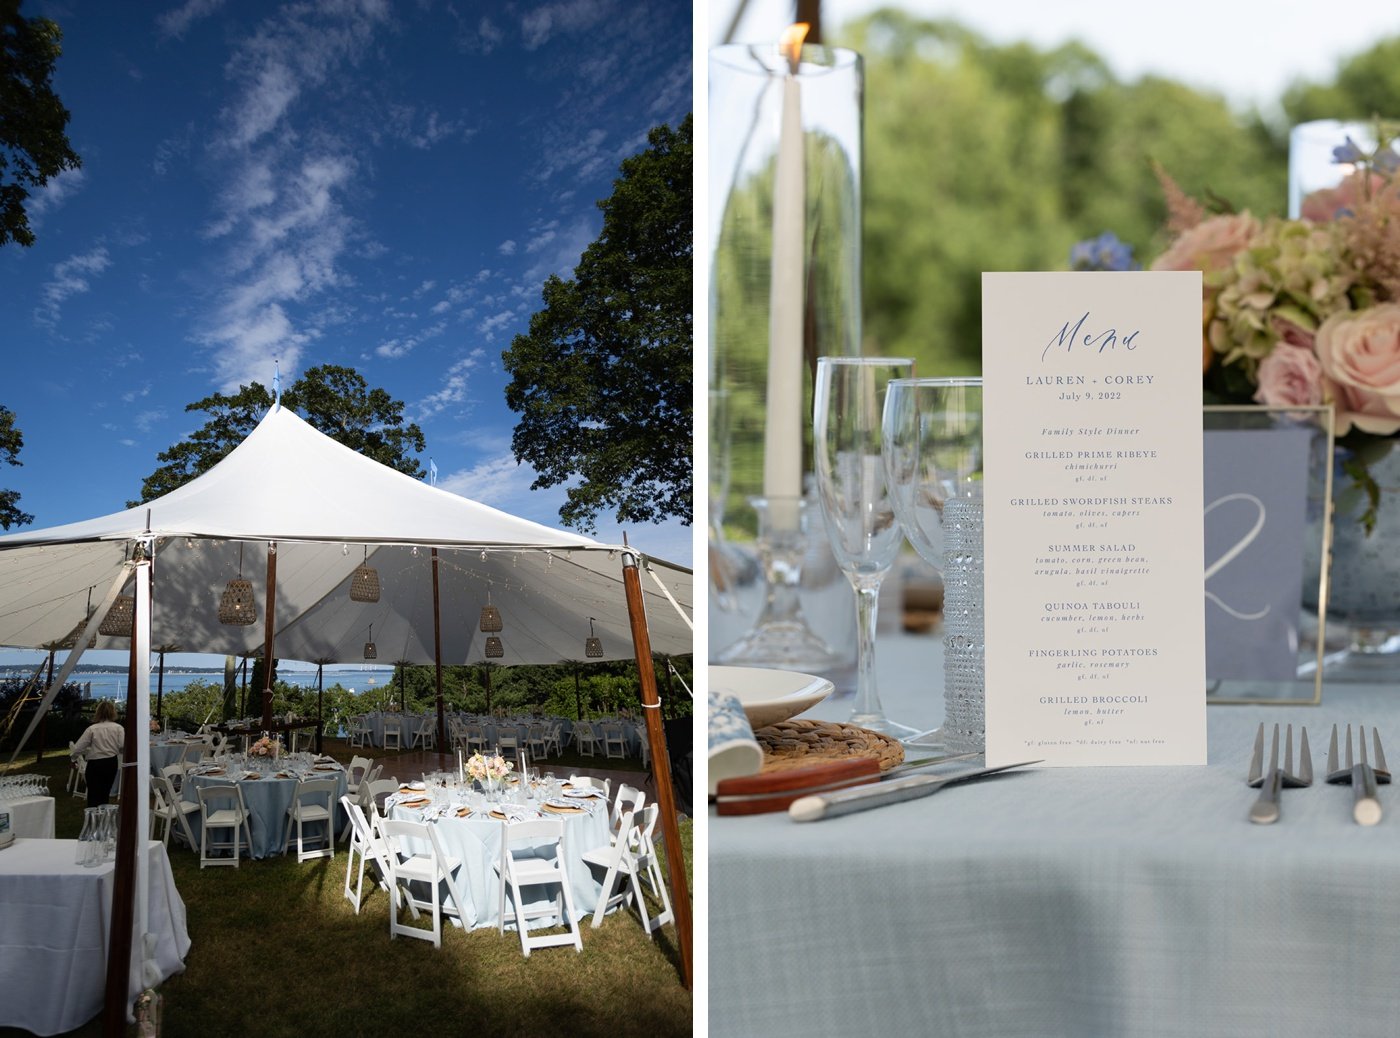 Sailcloth tent with hanging rattan lanterns at a backyard wedding in New York